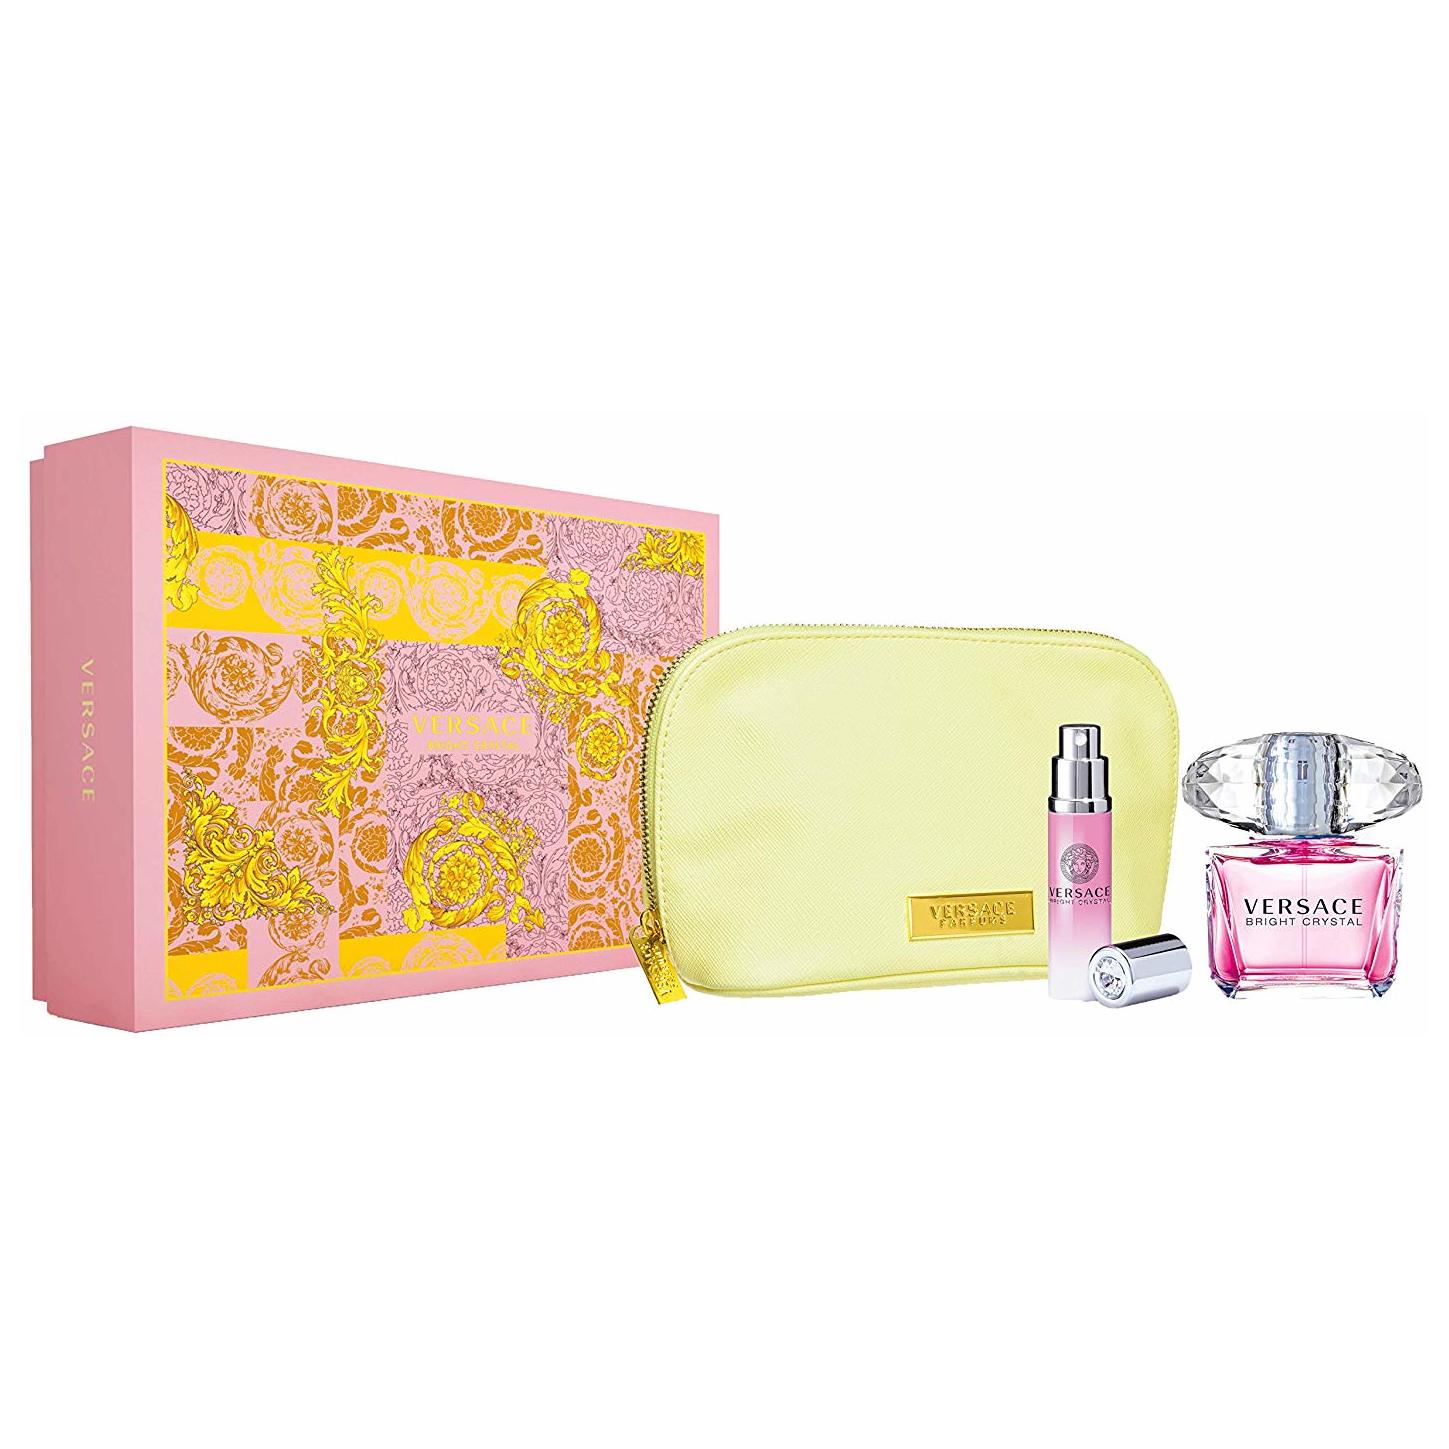 Versace Bright Crystal Gift Set For Women (Bright Crystal 90ml EDT + Bright Crystal 10ml EDT + Bag)